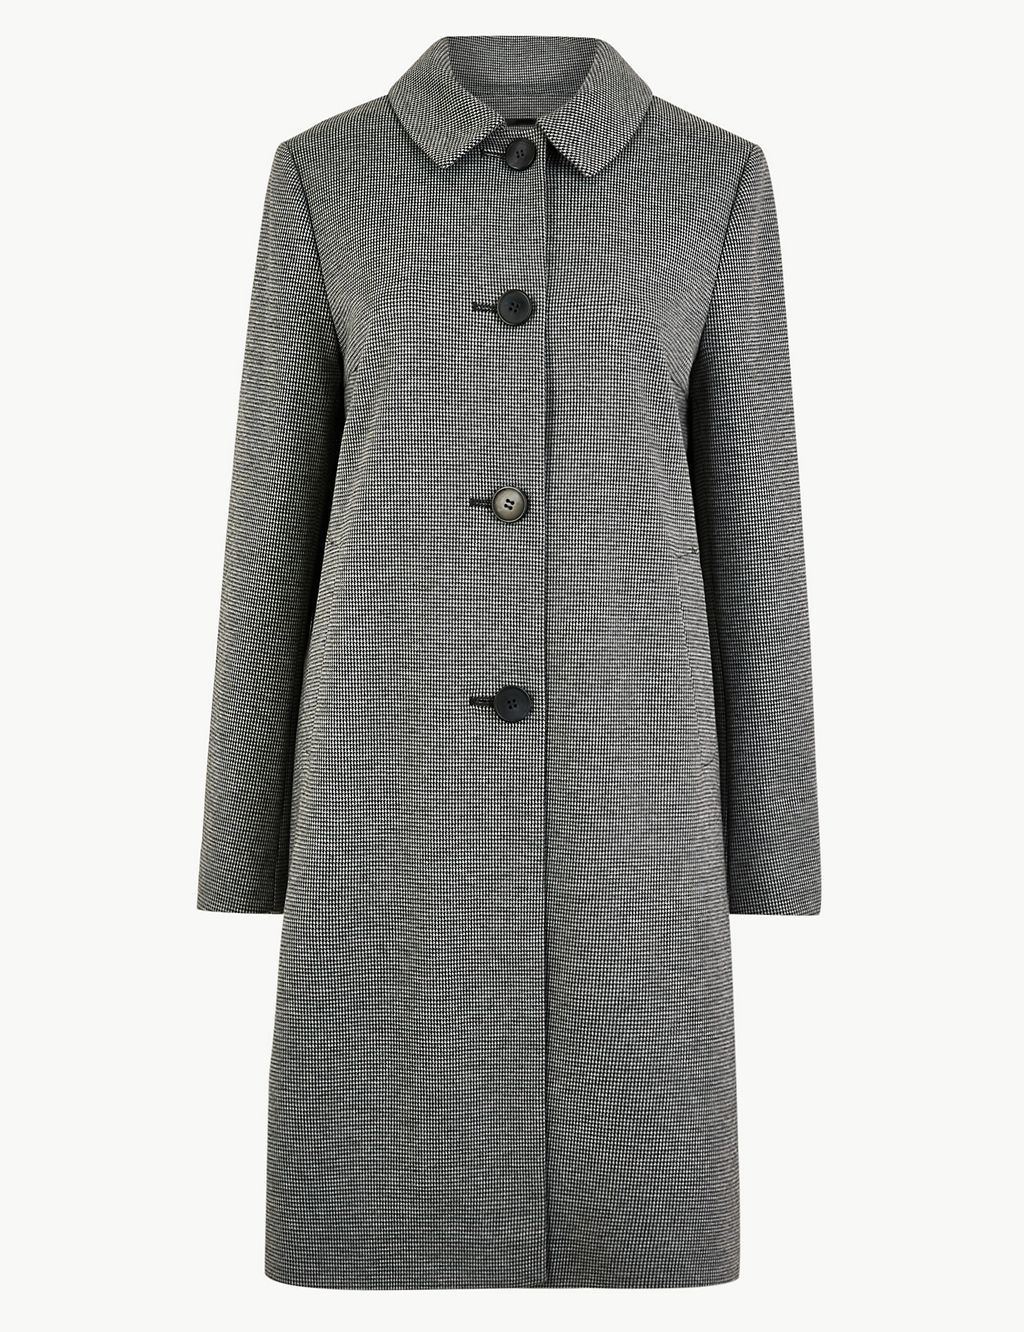 Checked Coat | M&S Collection | M&S